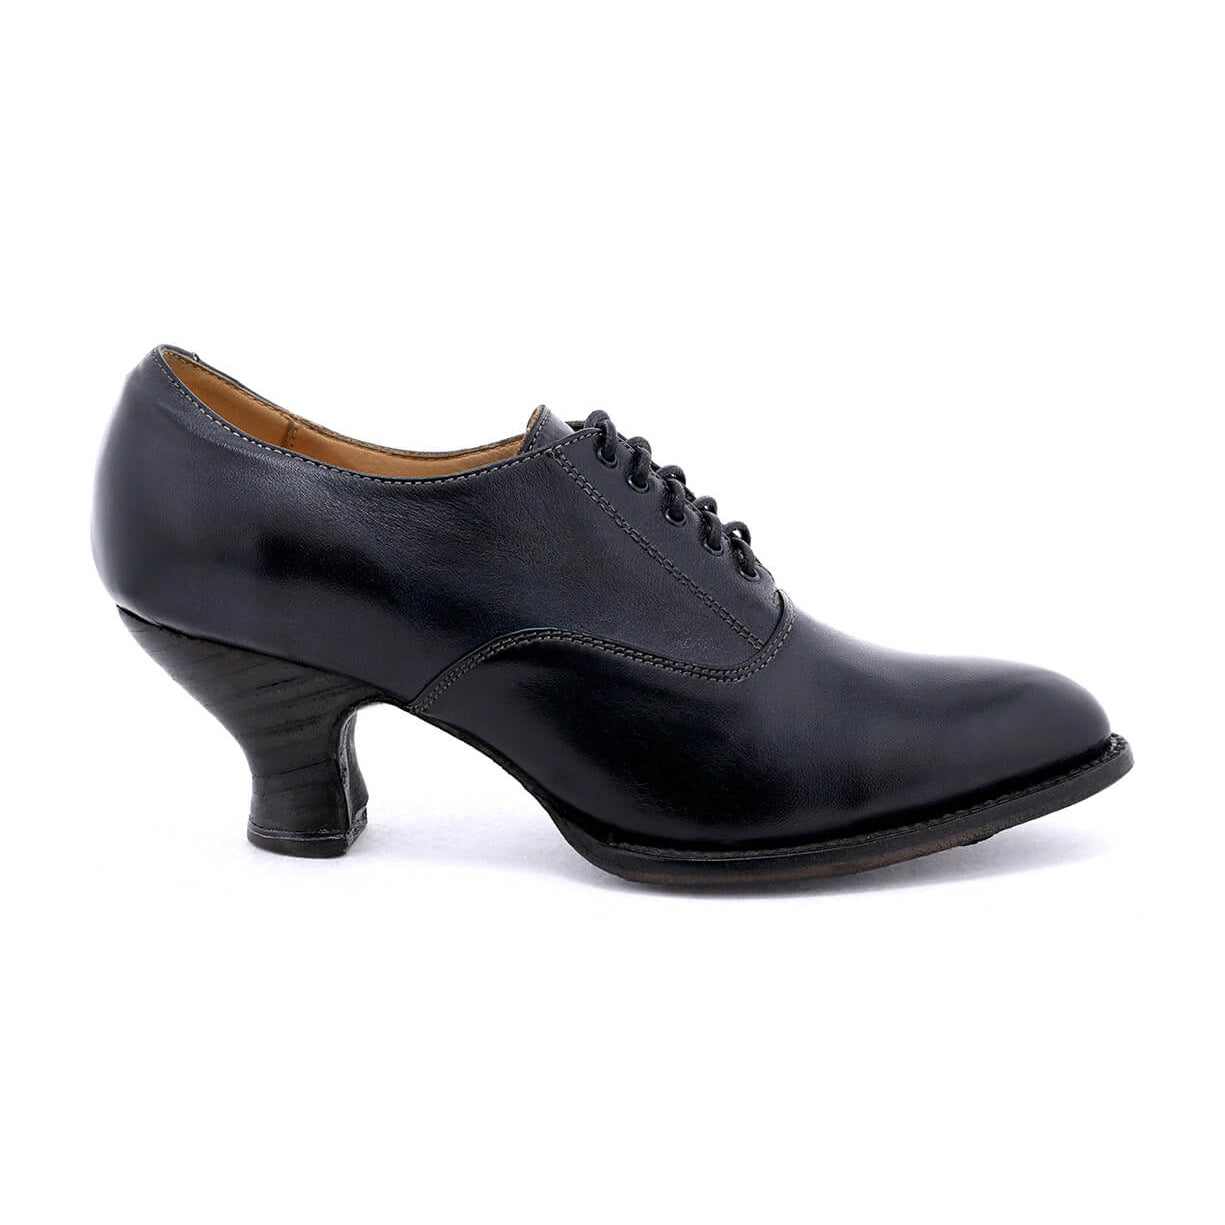 A women's black oxford shoe named "Janet" from the brand "Oak Tree Farms" with a lace-up design and spooled heel, set on a white background.